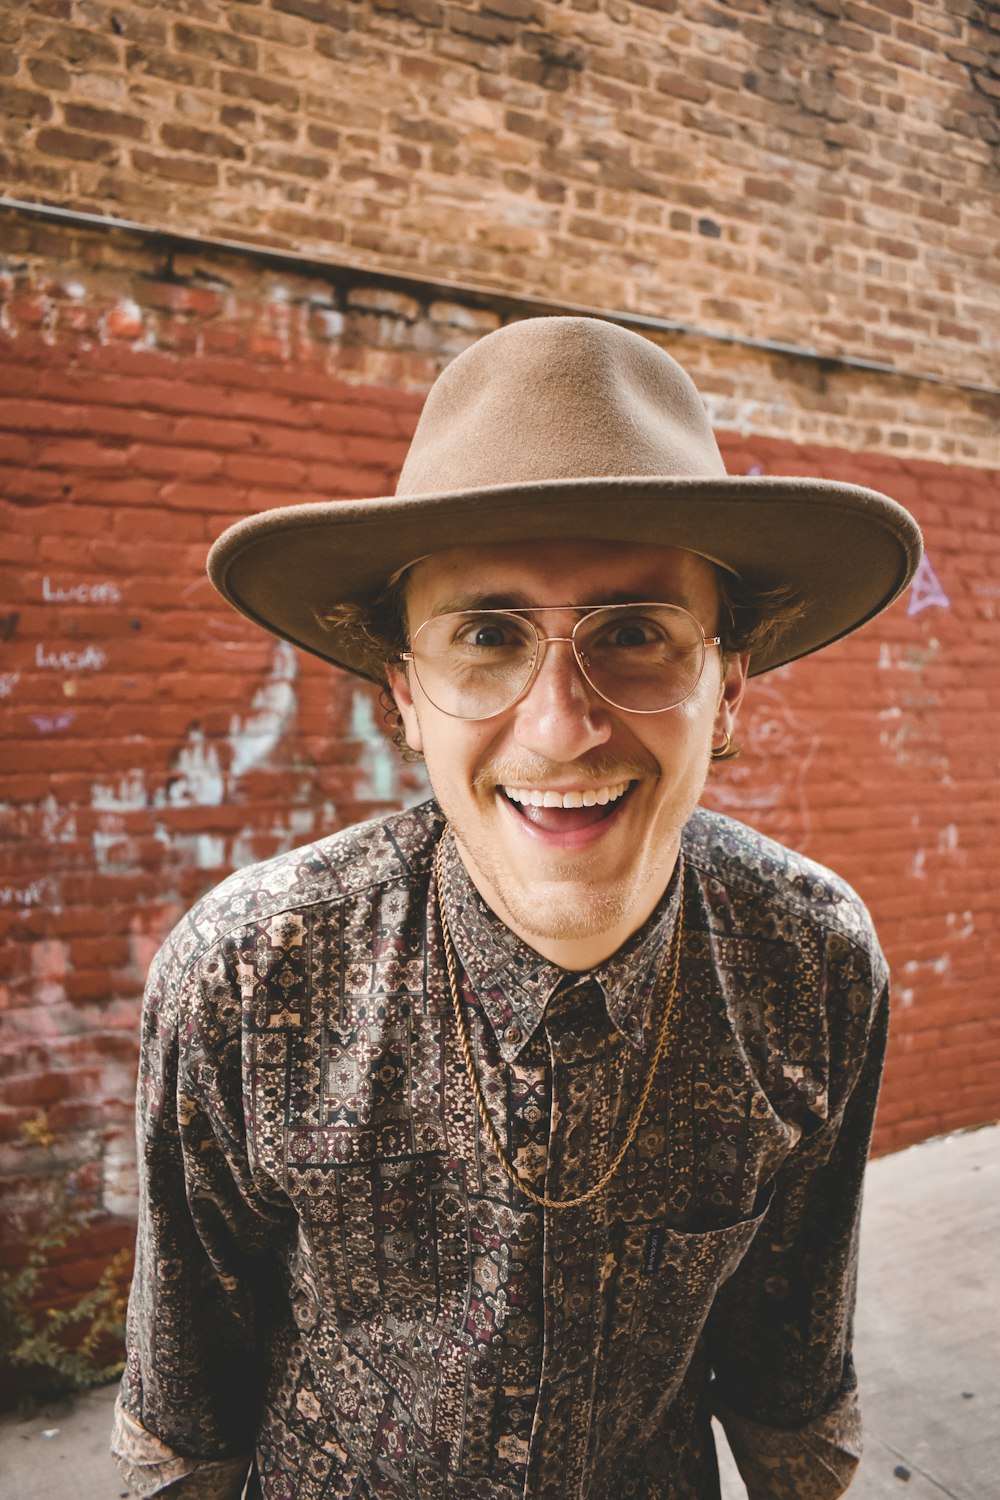 a man wearing a hat and glasses standing in front of a brick wall